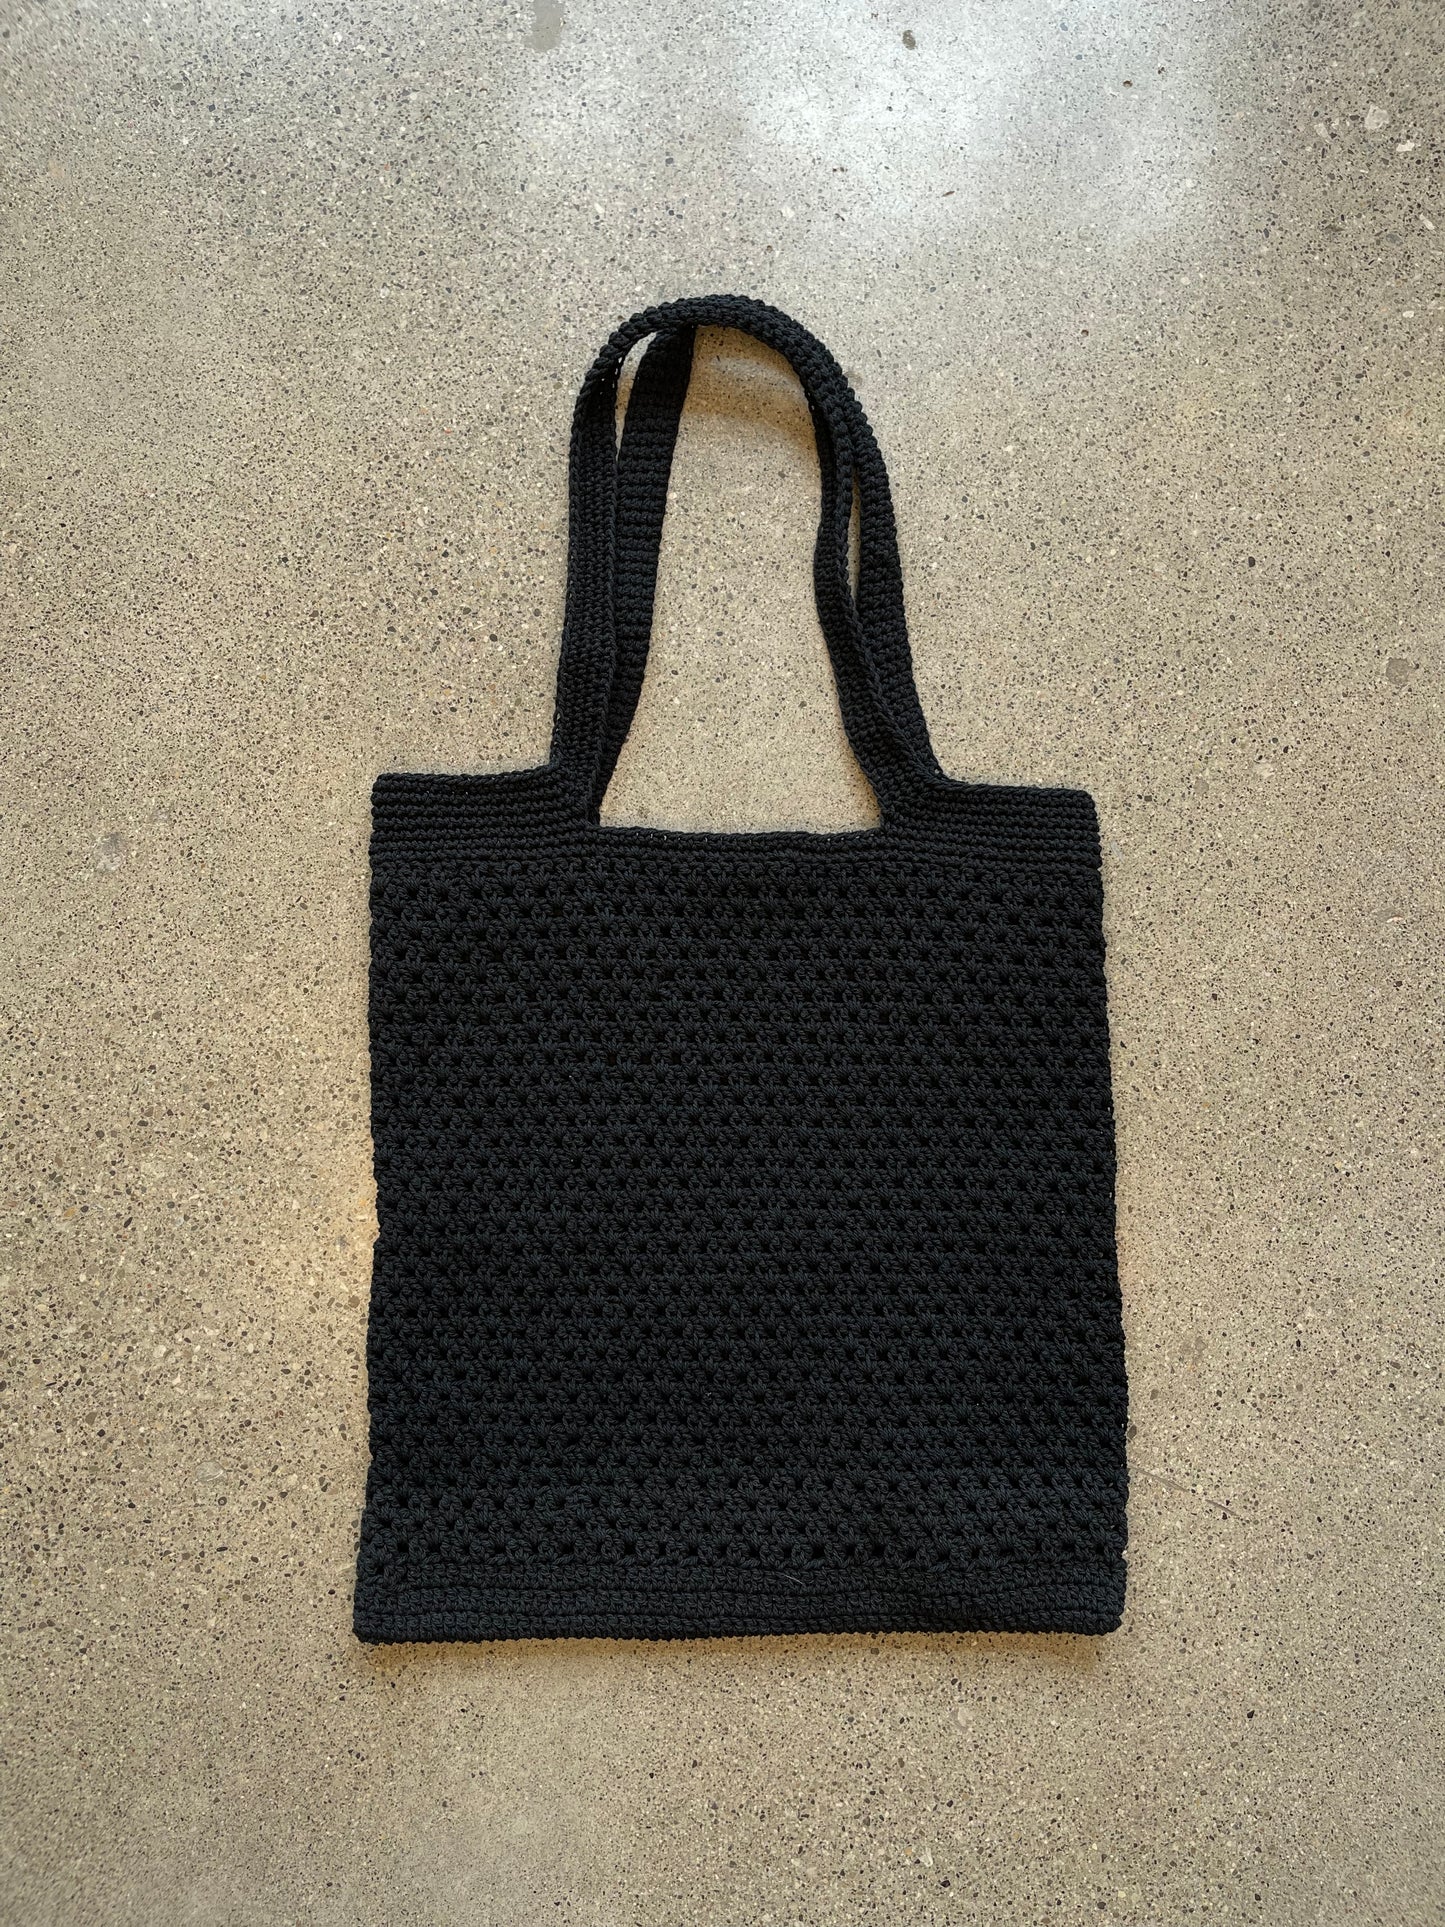 Black Hand Knitted Tote Bag